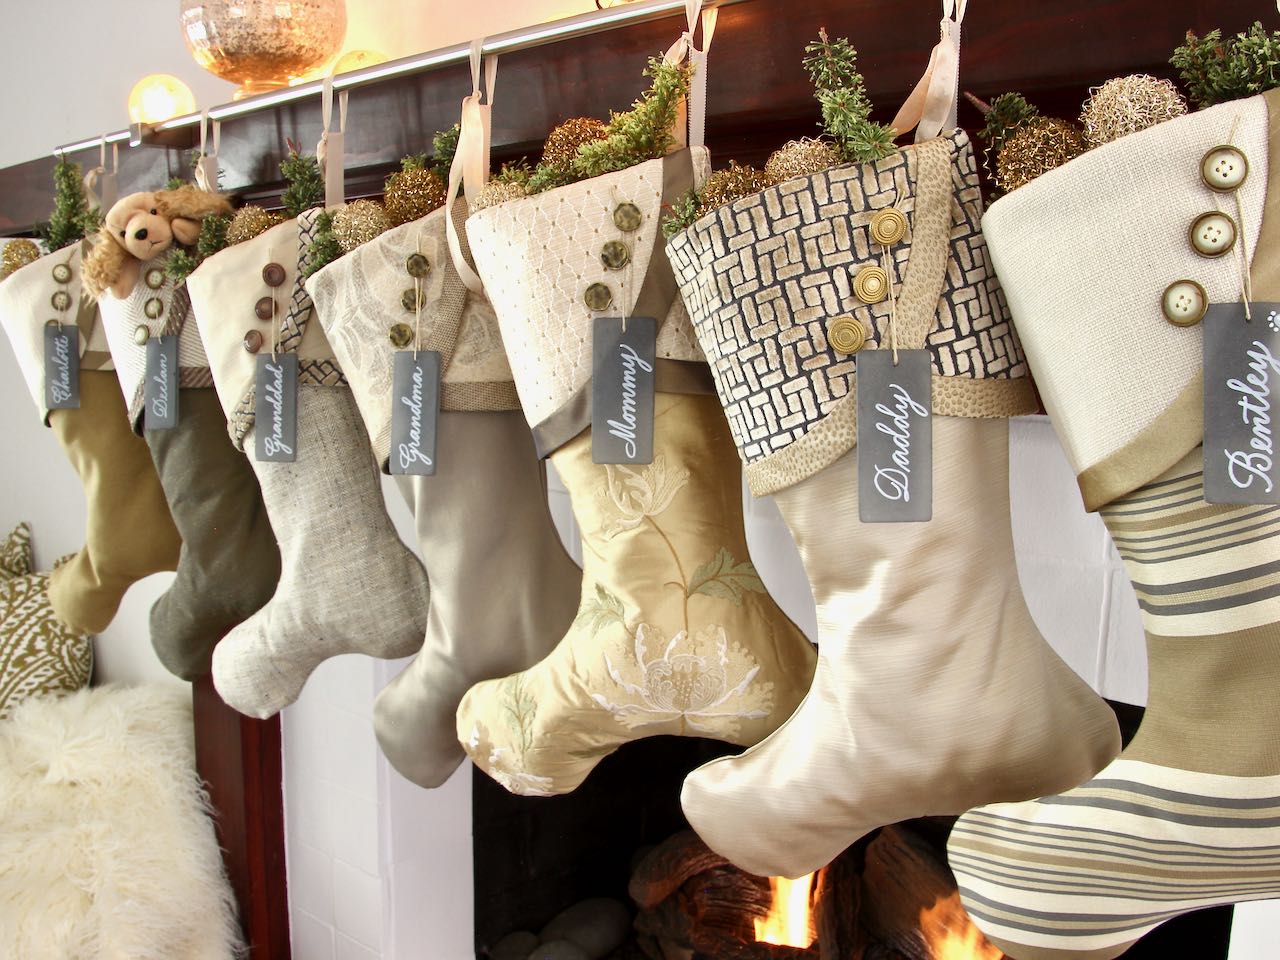 7 coordinating yet unique Christmas stockings are hagning from a mantel above a fire. Sea glass name tags hang from the top of three buttons on each cuff